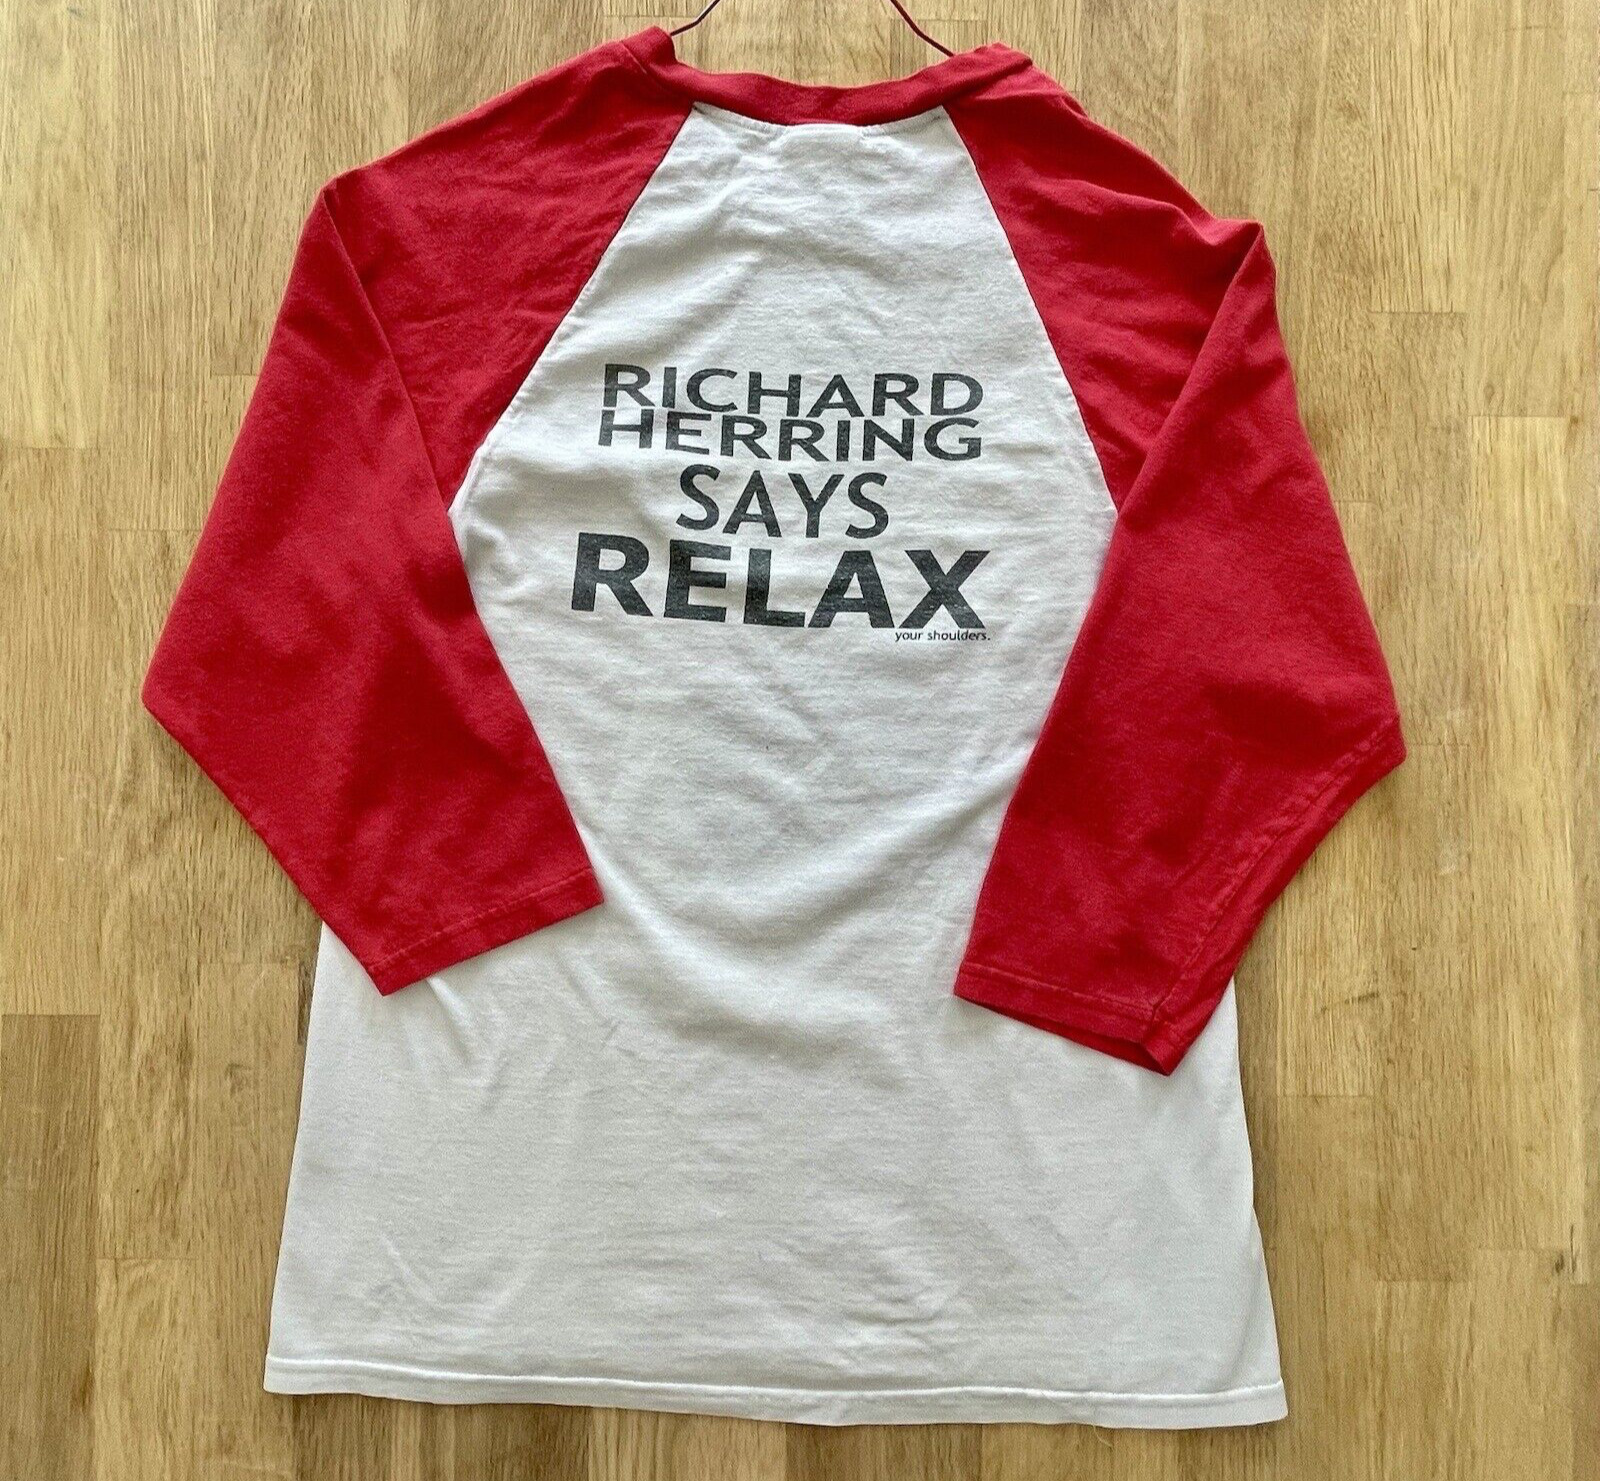 Richard Herring Says Relax (Your Shoulders) - LS Top Small 34” 1990s Comedy RARE